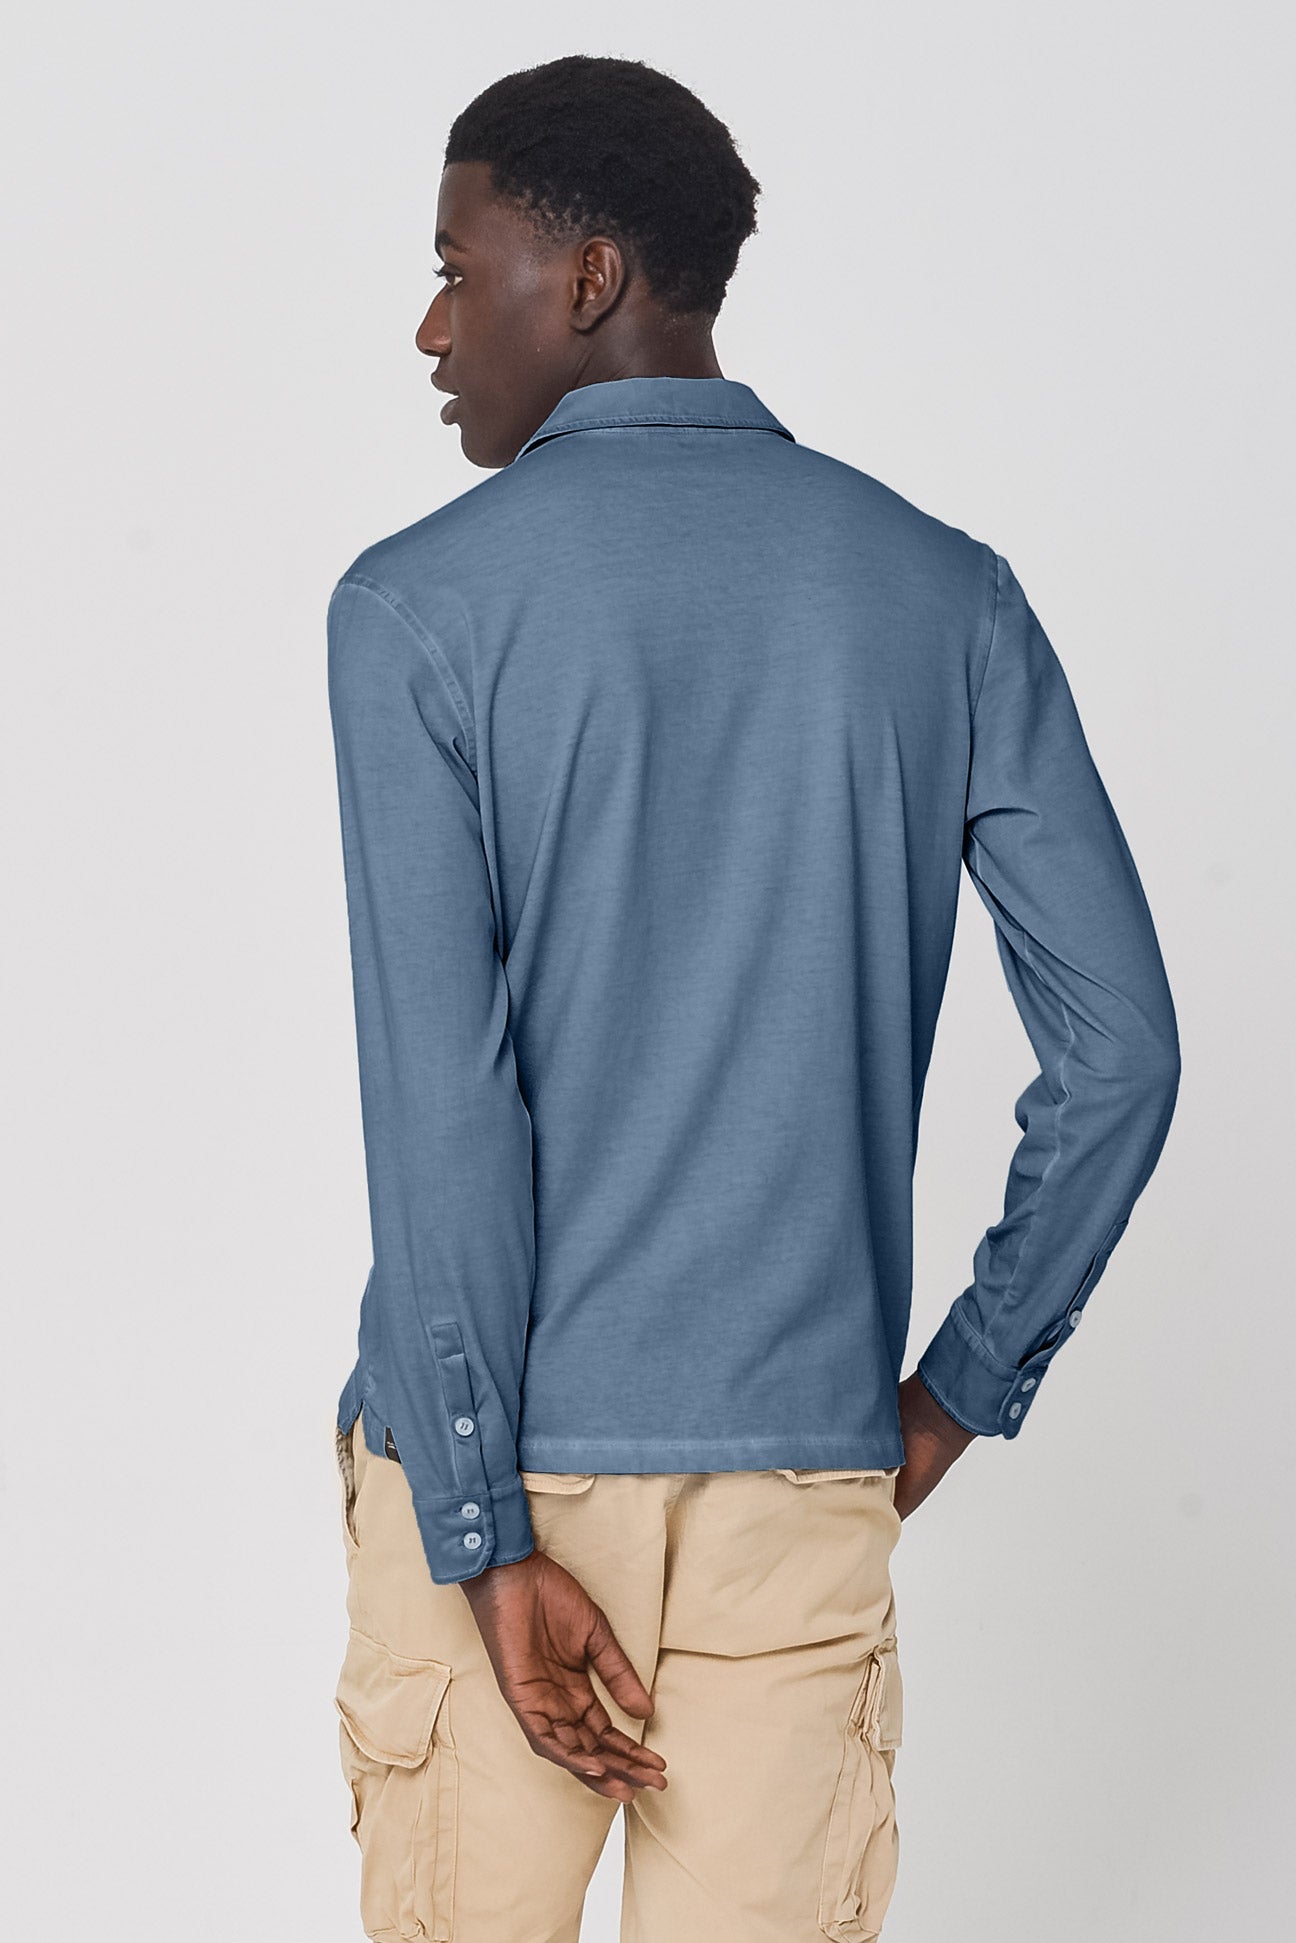 Performance Shirt in Jeans - Shirts